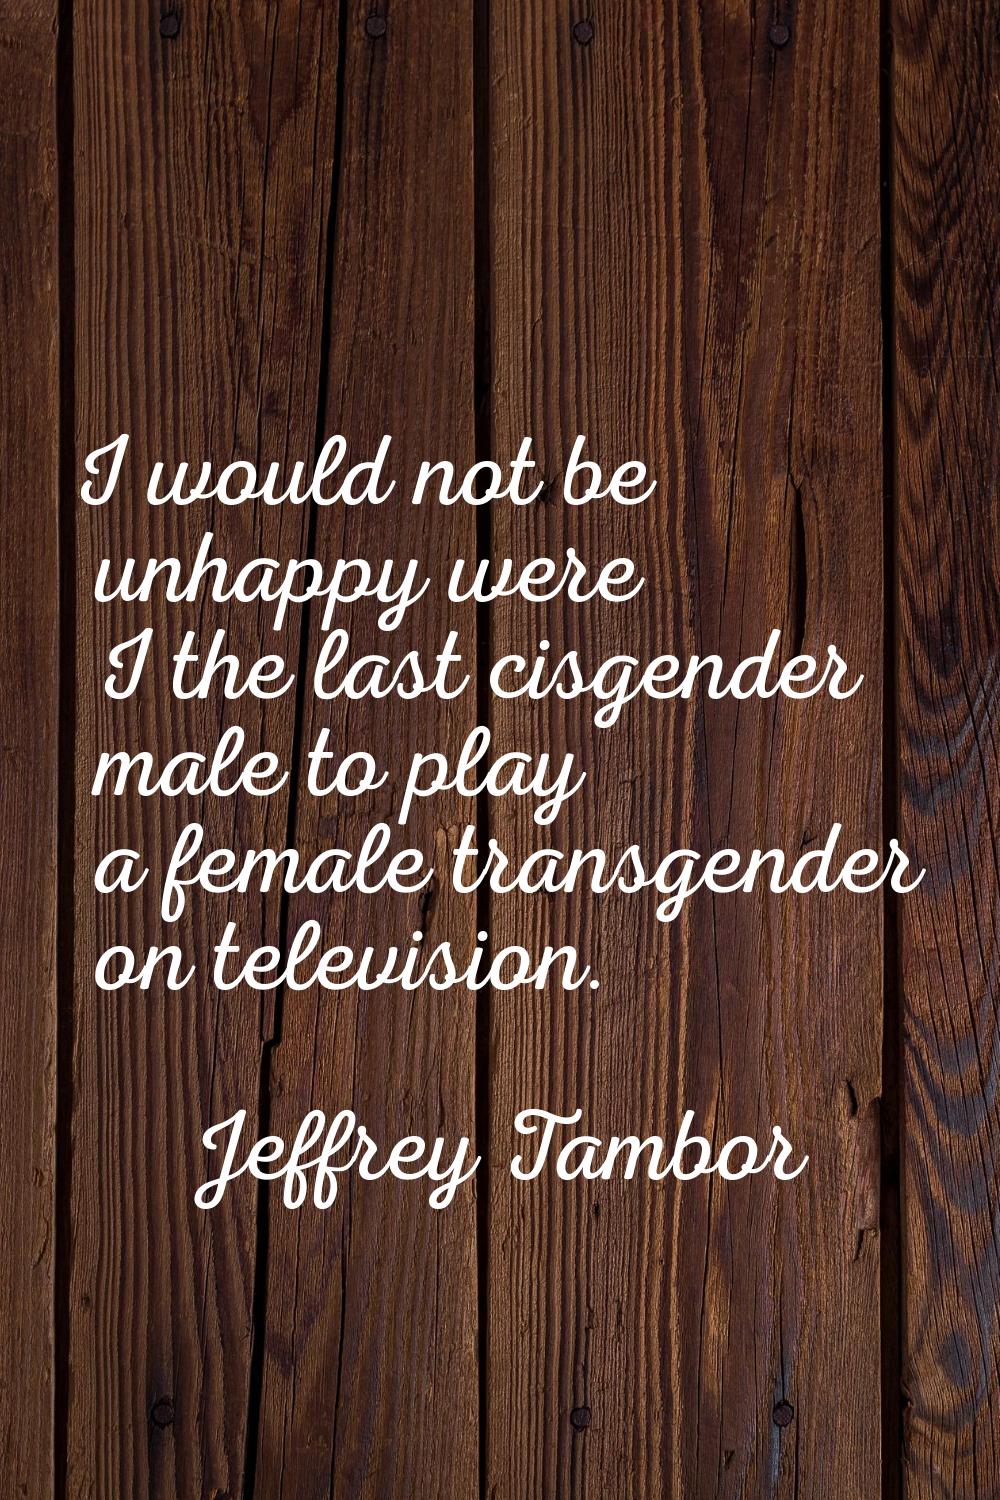 I would not be unhappy were I the last cisgender male to play a female transgender on television.